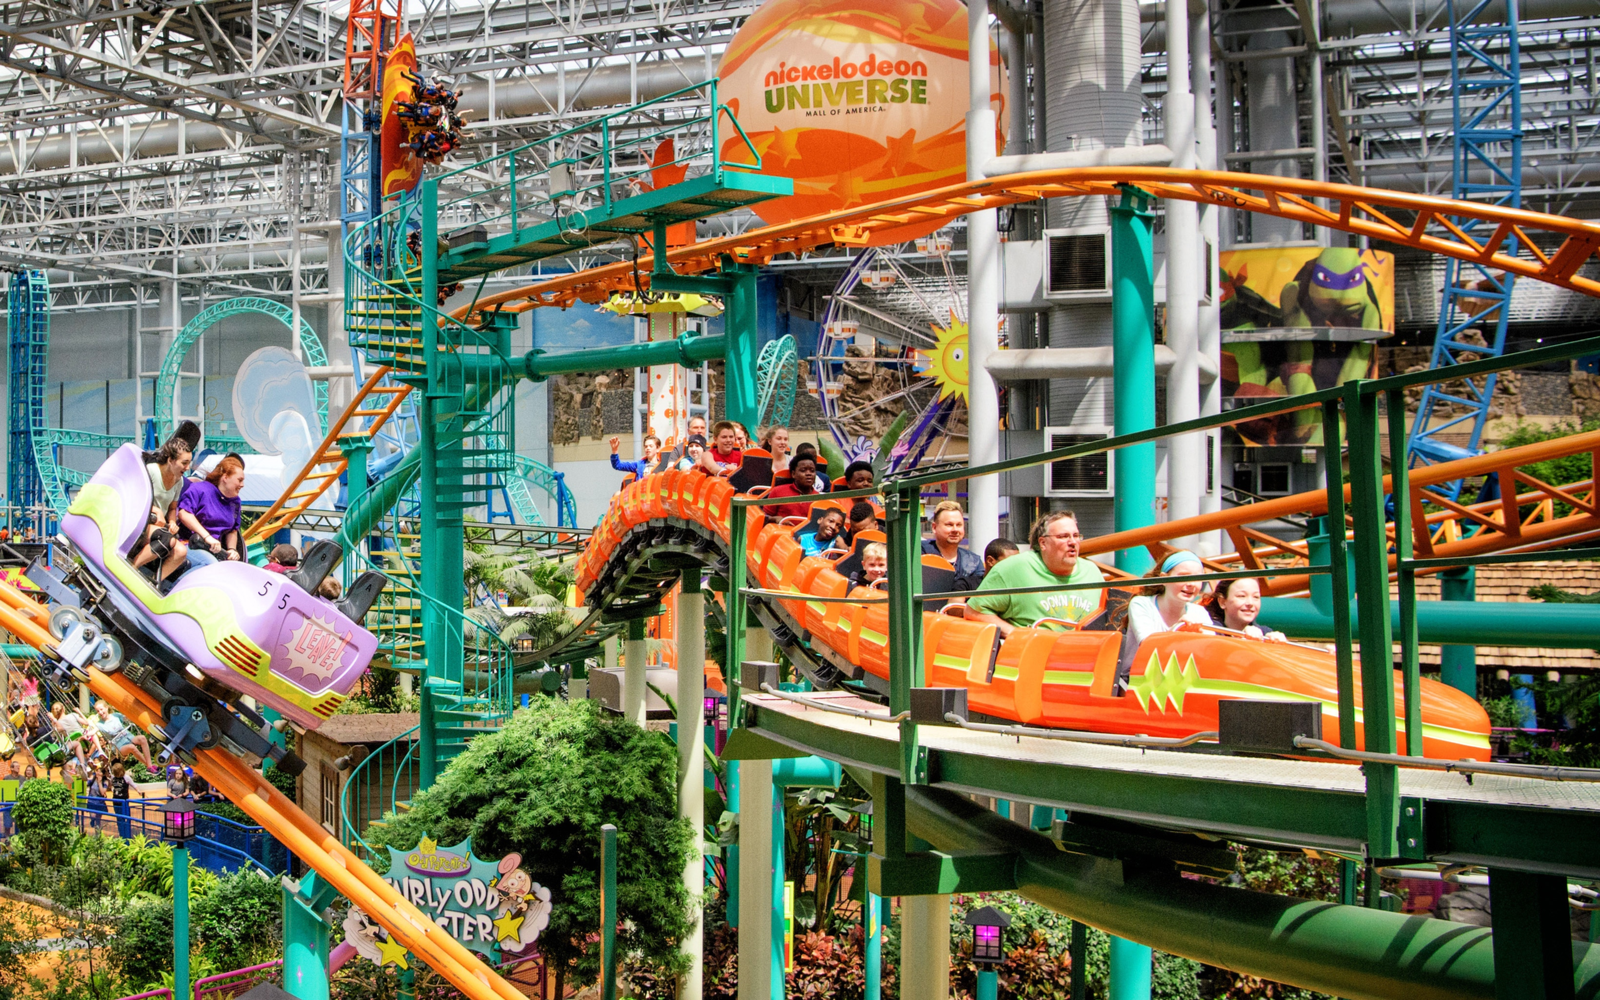 Roller coaster at the Mall of America, one of the best shopping malls in America, pictured in the amusement area